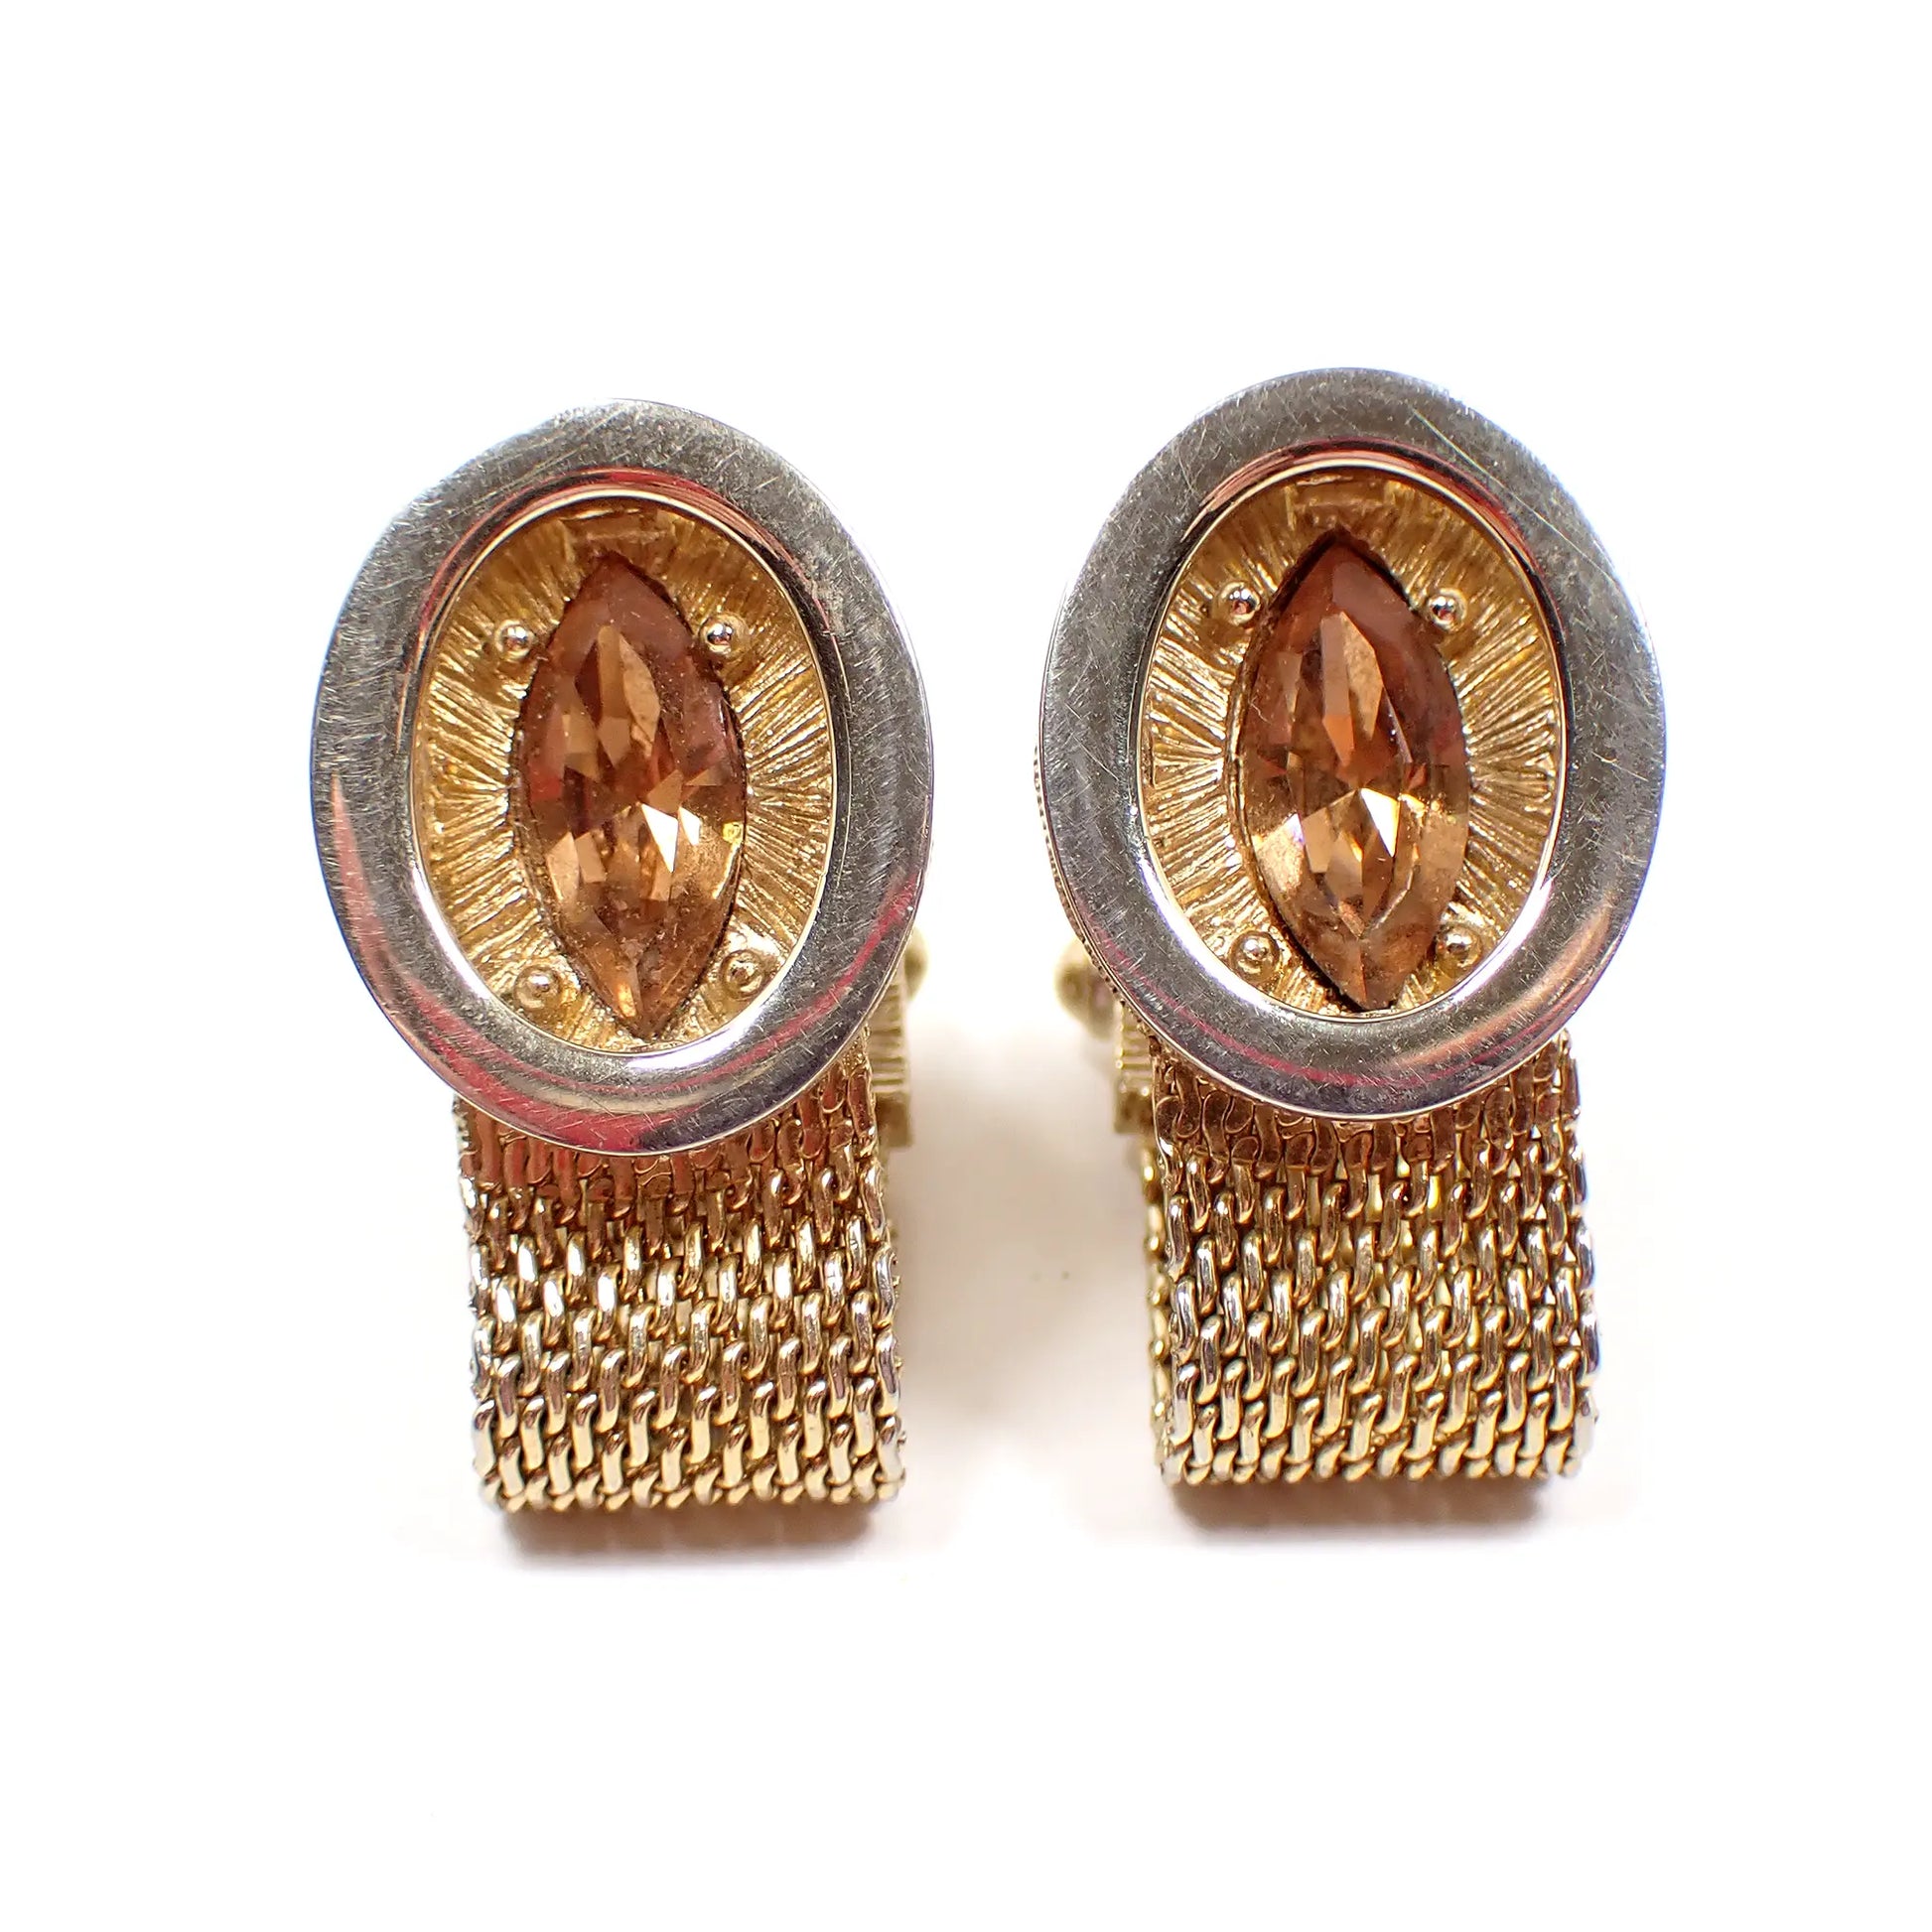 Front view of the Swank Mid Century vintage wrap around mesh cufflinks. The metal is gold tone in color. There are ovals in the front with textured ovals behind it. In the middle are marquis cut light brown rhinestones.